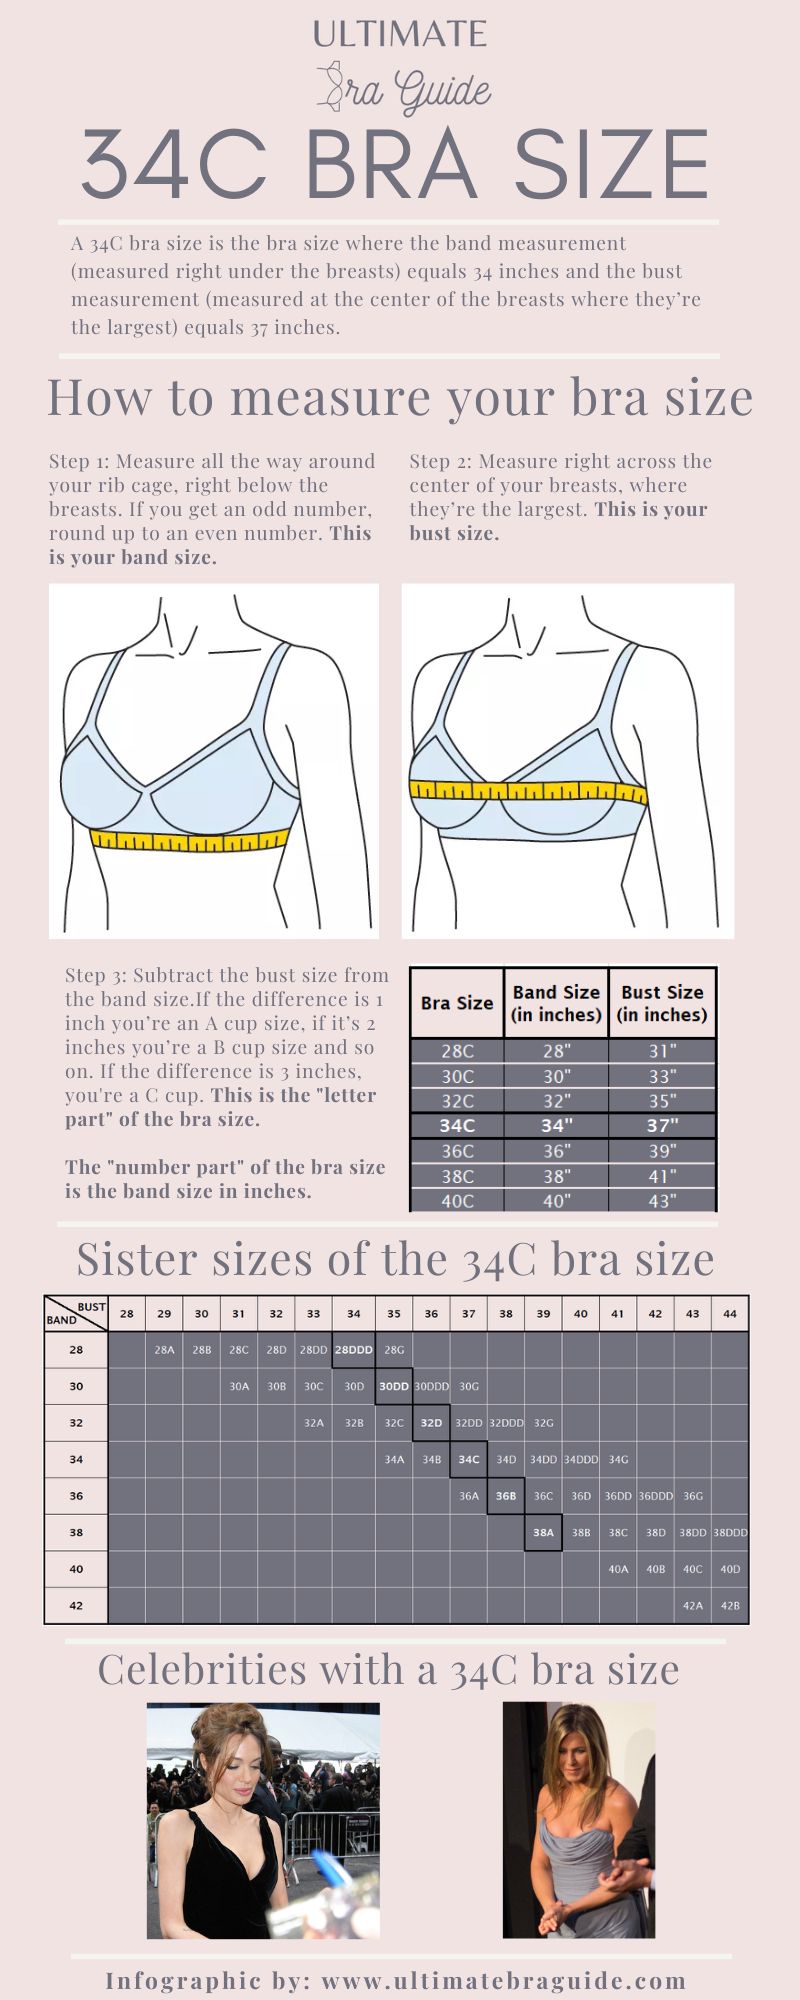 An infographic all about the 34C bra size - what it is, how to measure if you're 34C bra size, 34C bra sister sizes, 34C cup examples, and so on